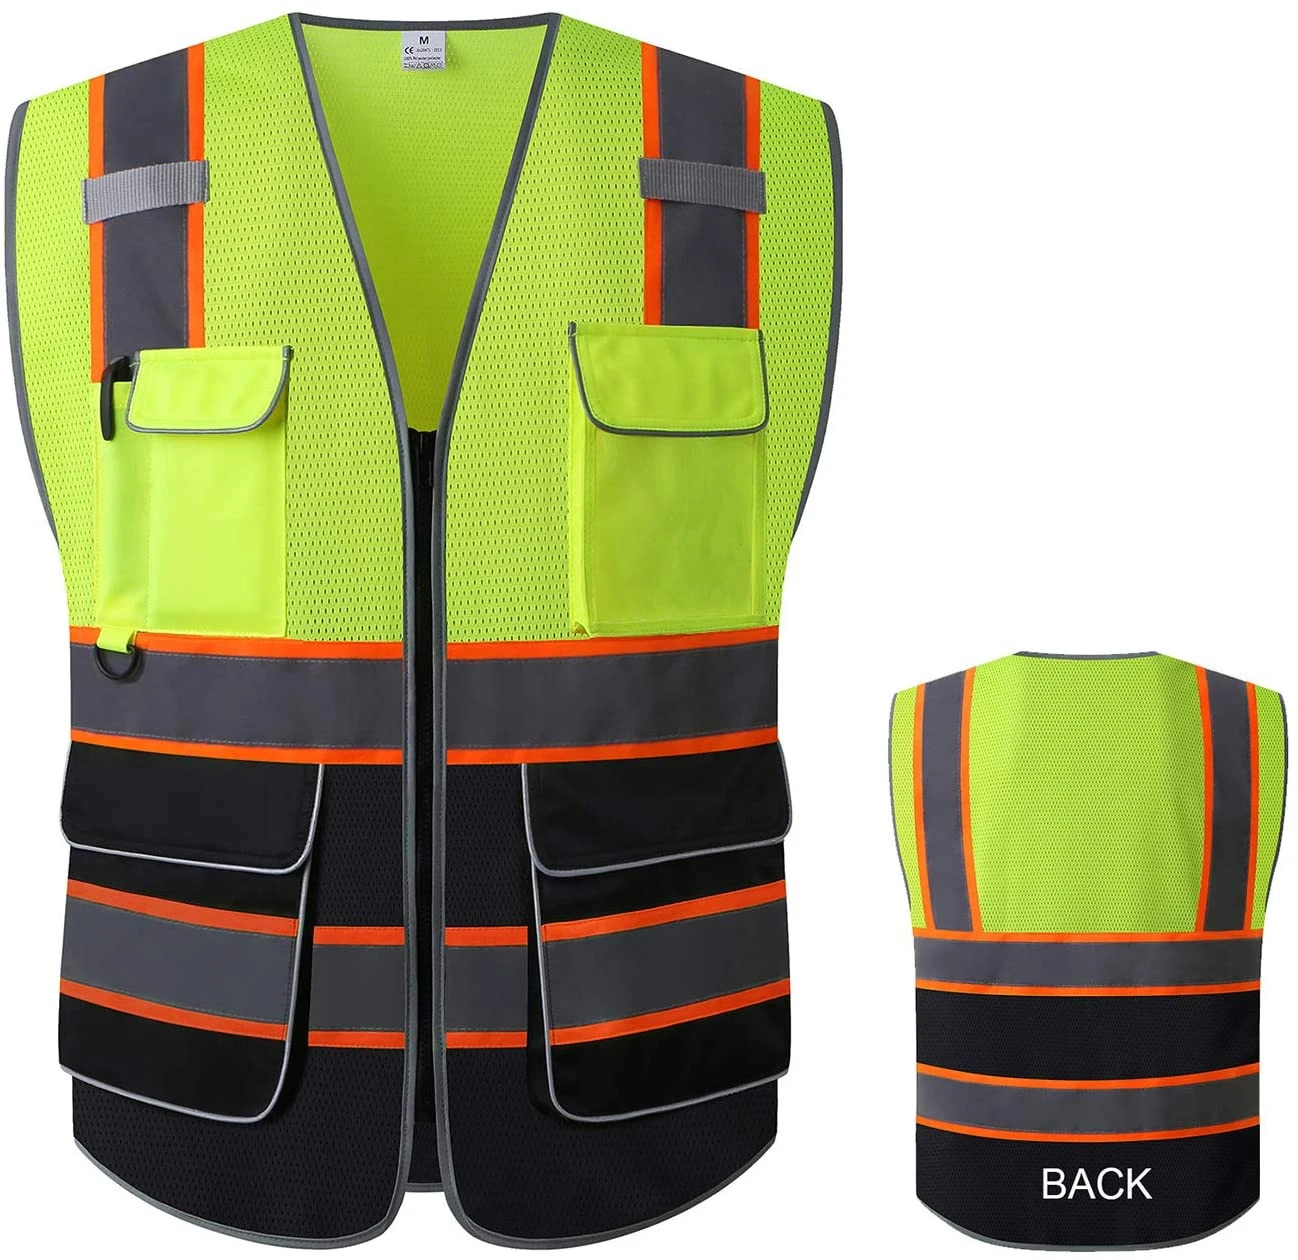 Reflective Mesh Safety Vest - High Visibility Multi Pockets Breathable Workwear